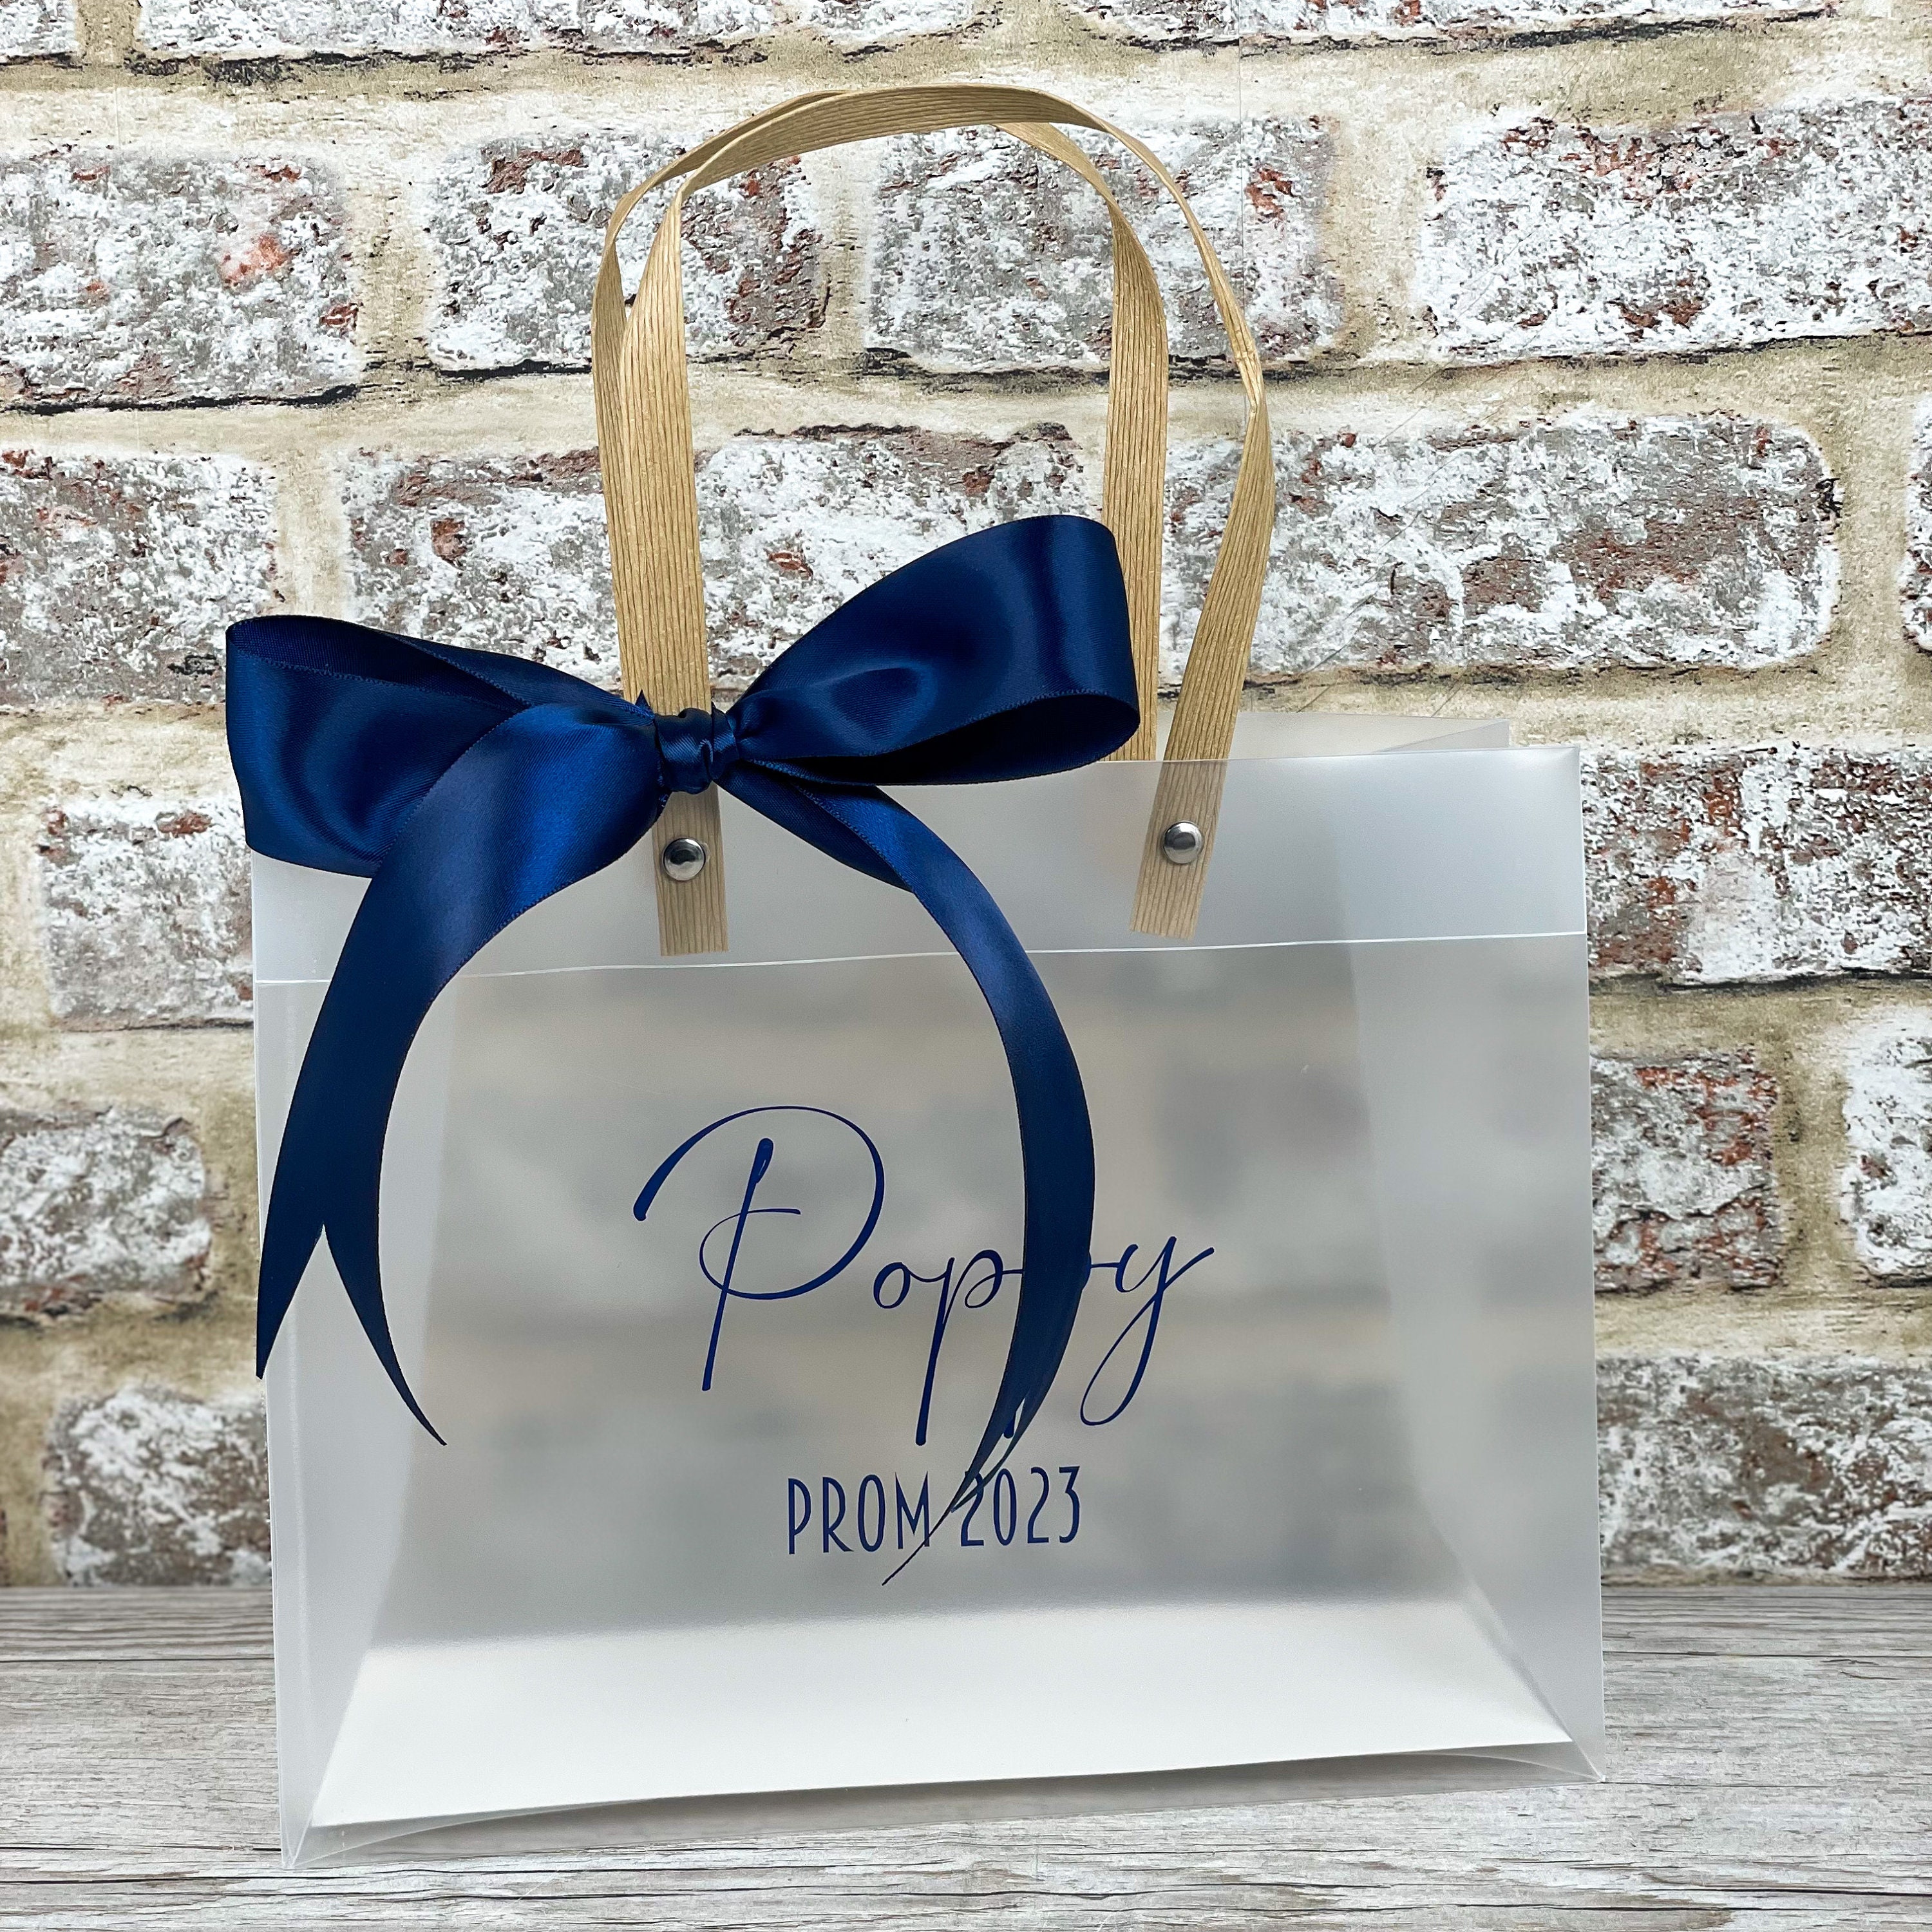 5 Small Luxury Ribbon Gift Bags Boutique Baby Wedding Hen Party